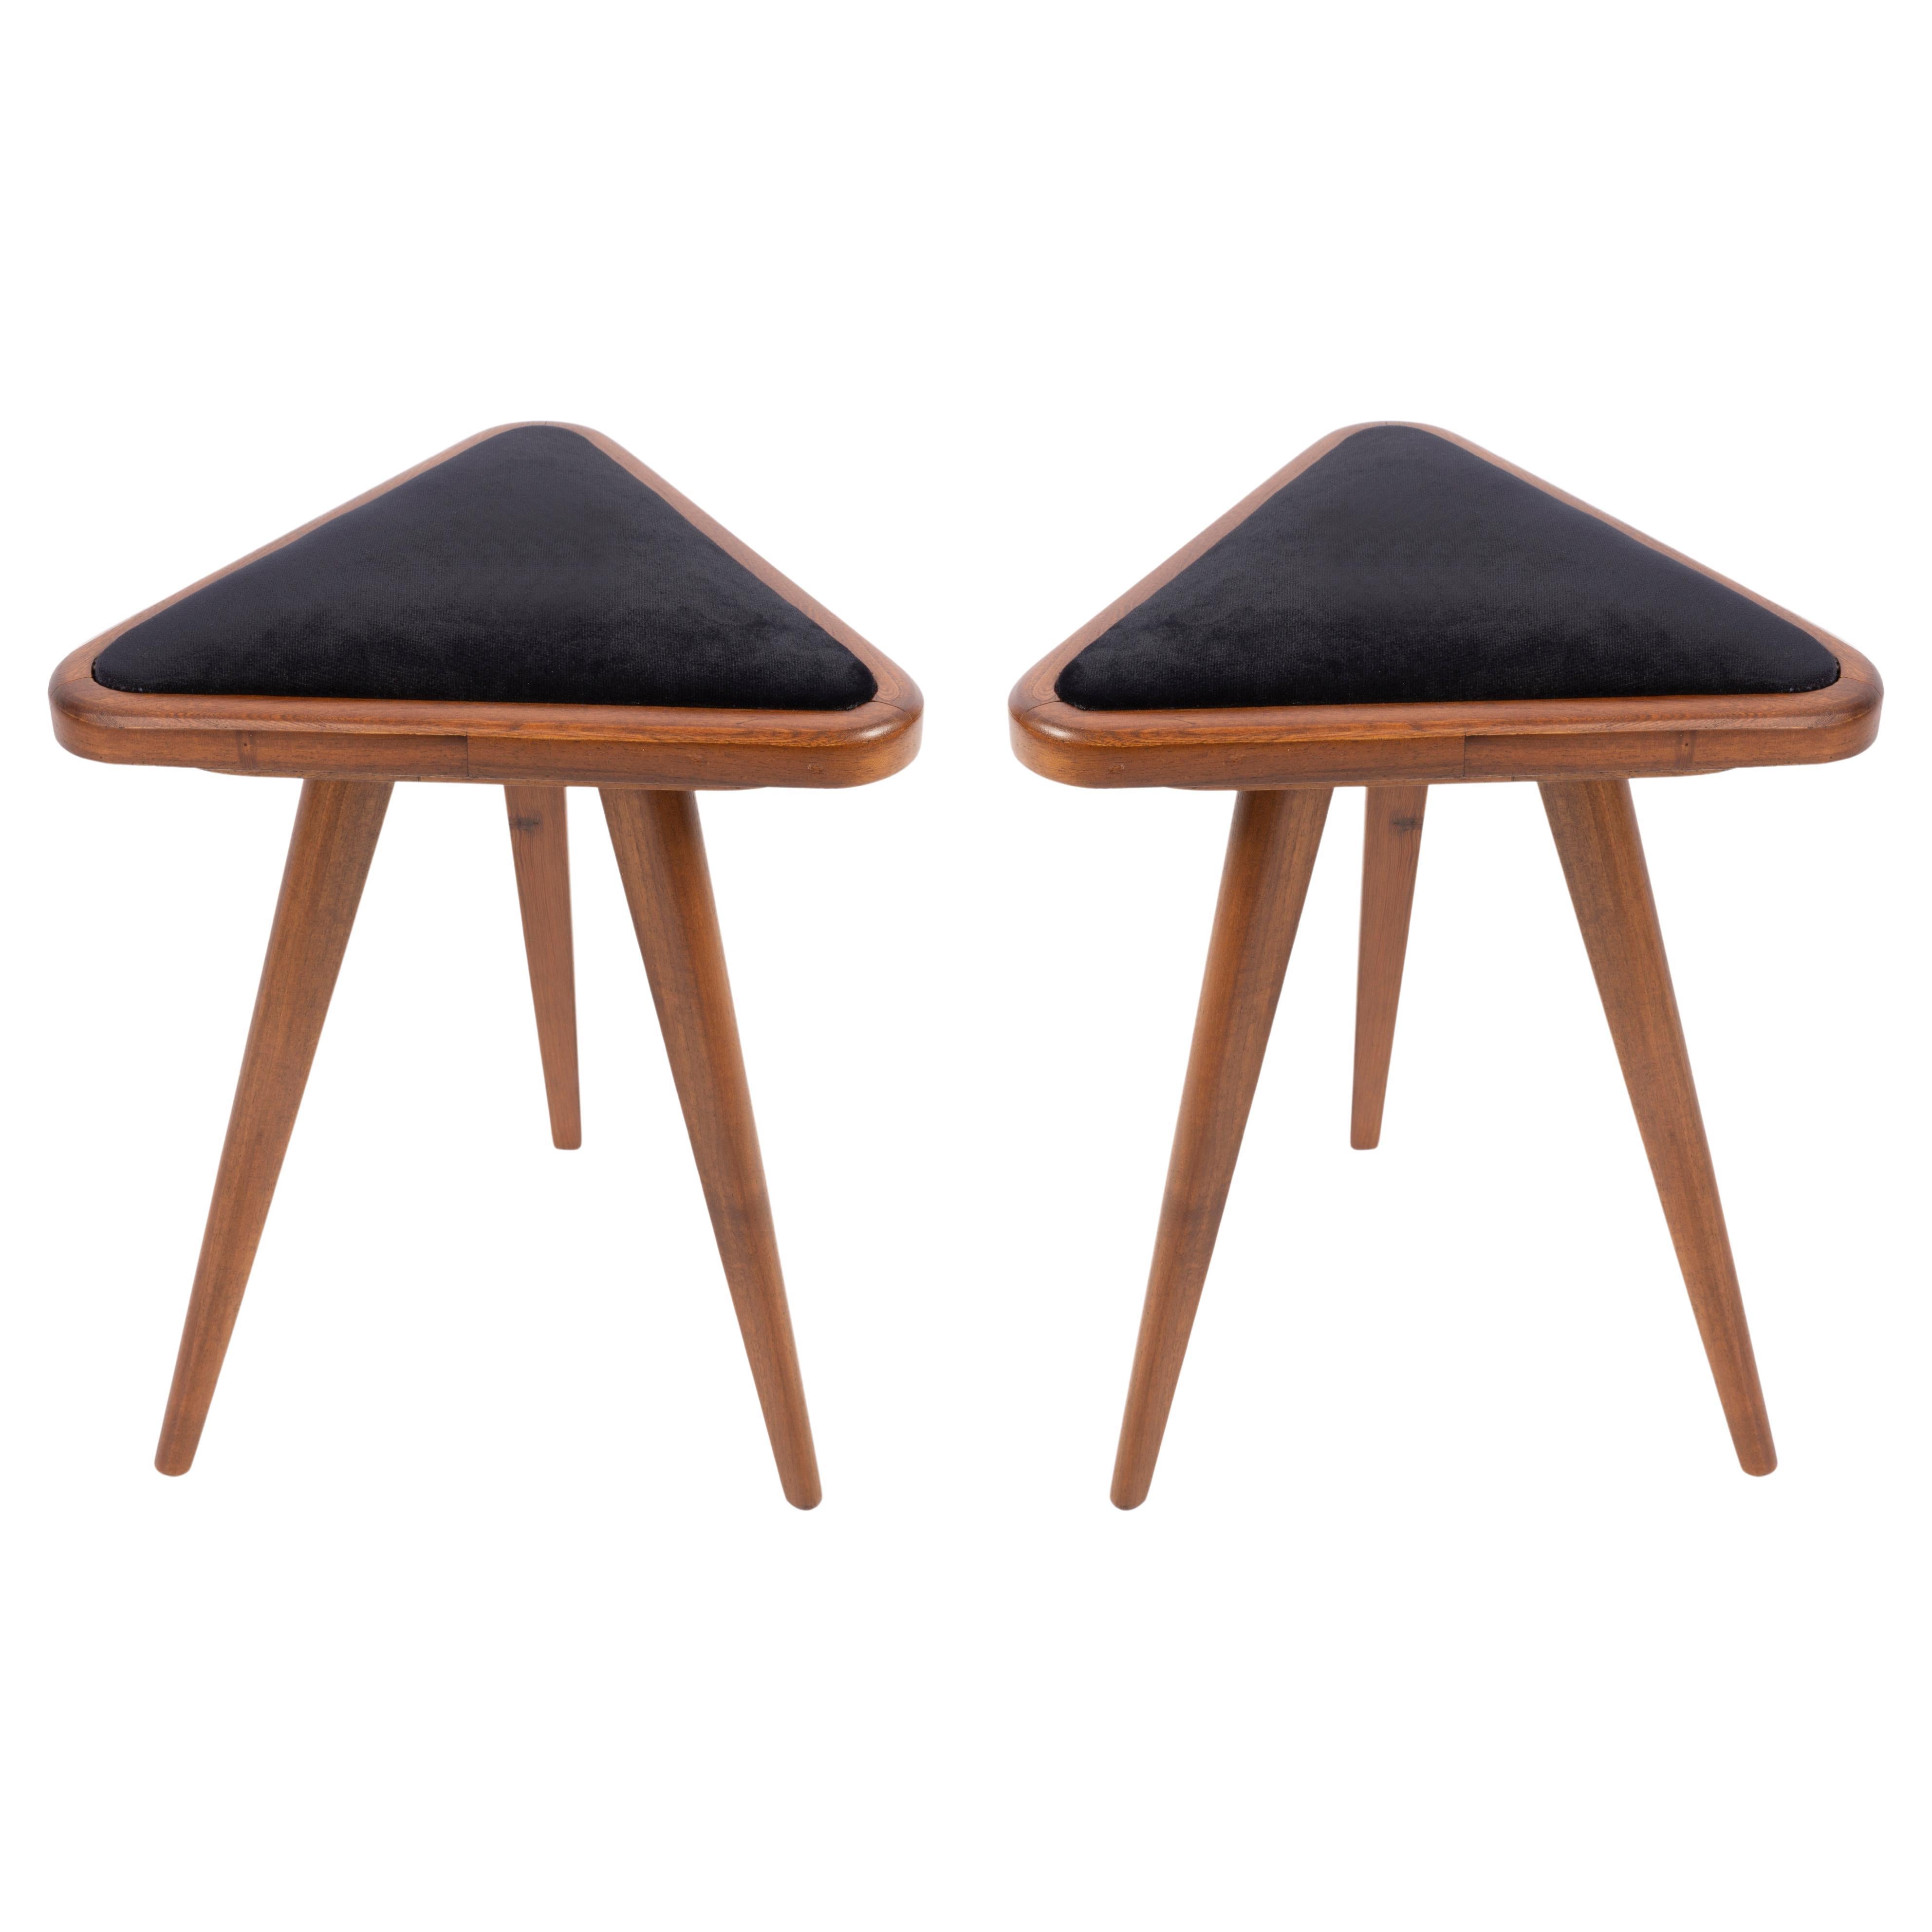 Set of Two Black Velvet 20th Century Triangle Stools, Europe, 1960s For Sale